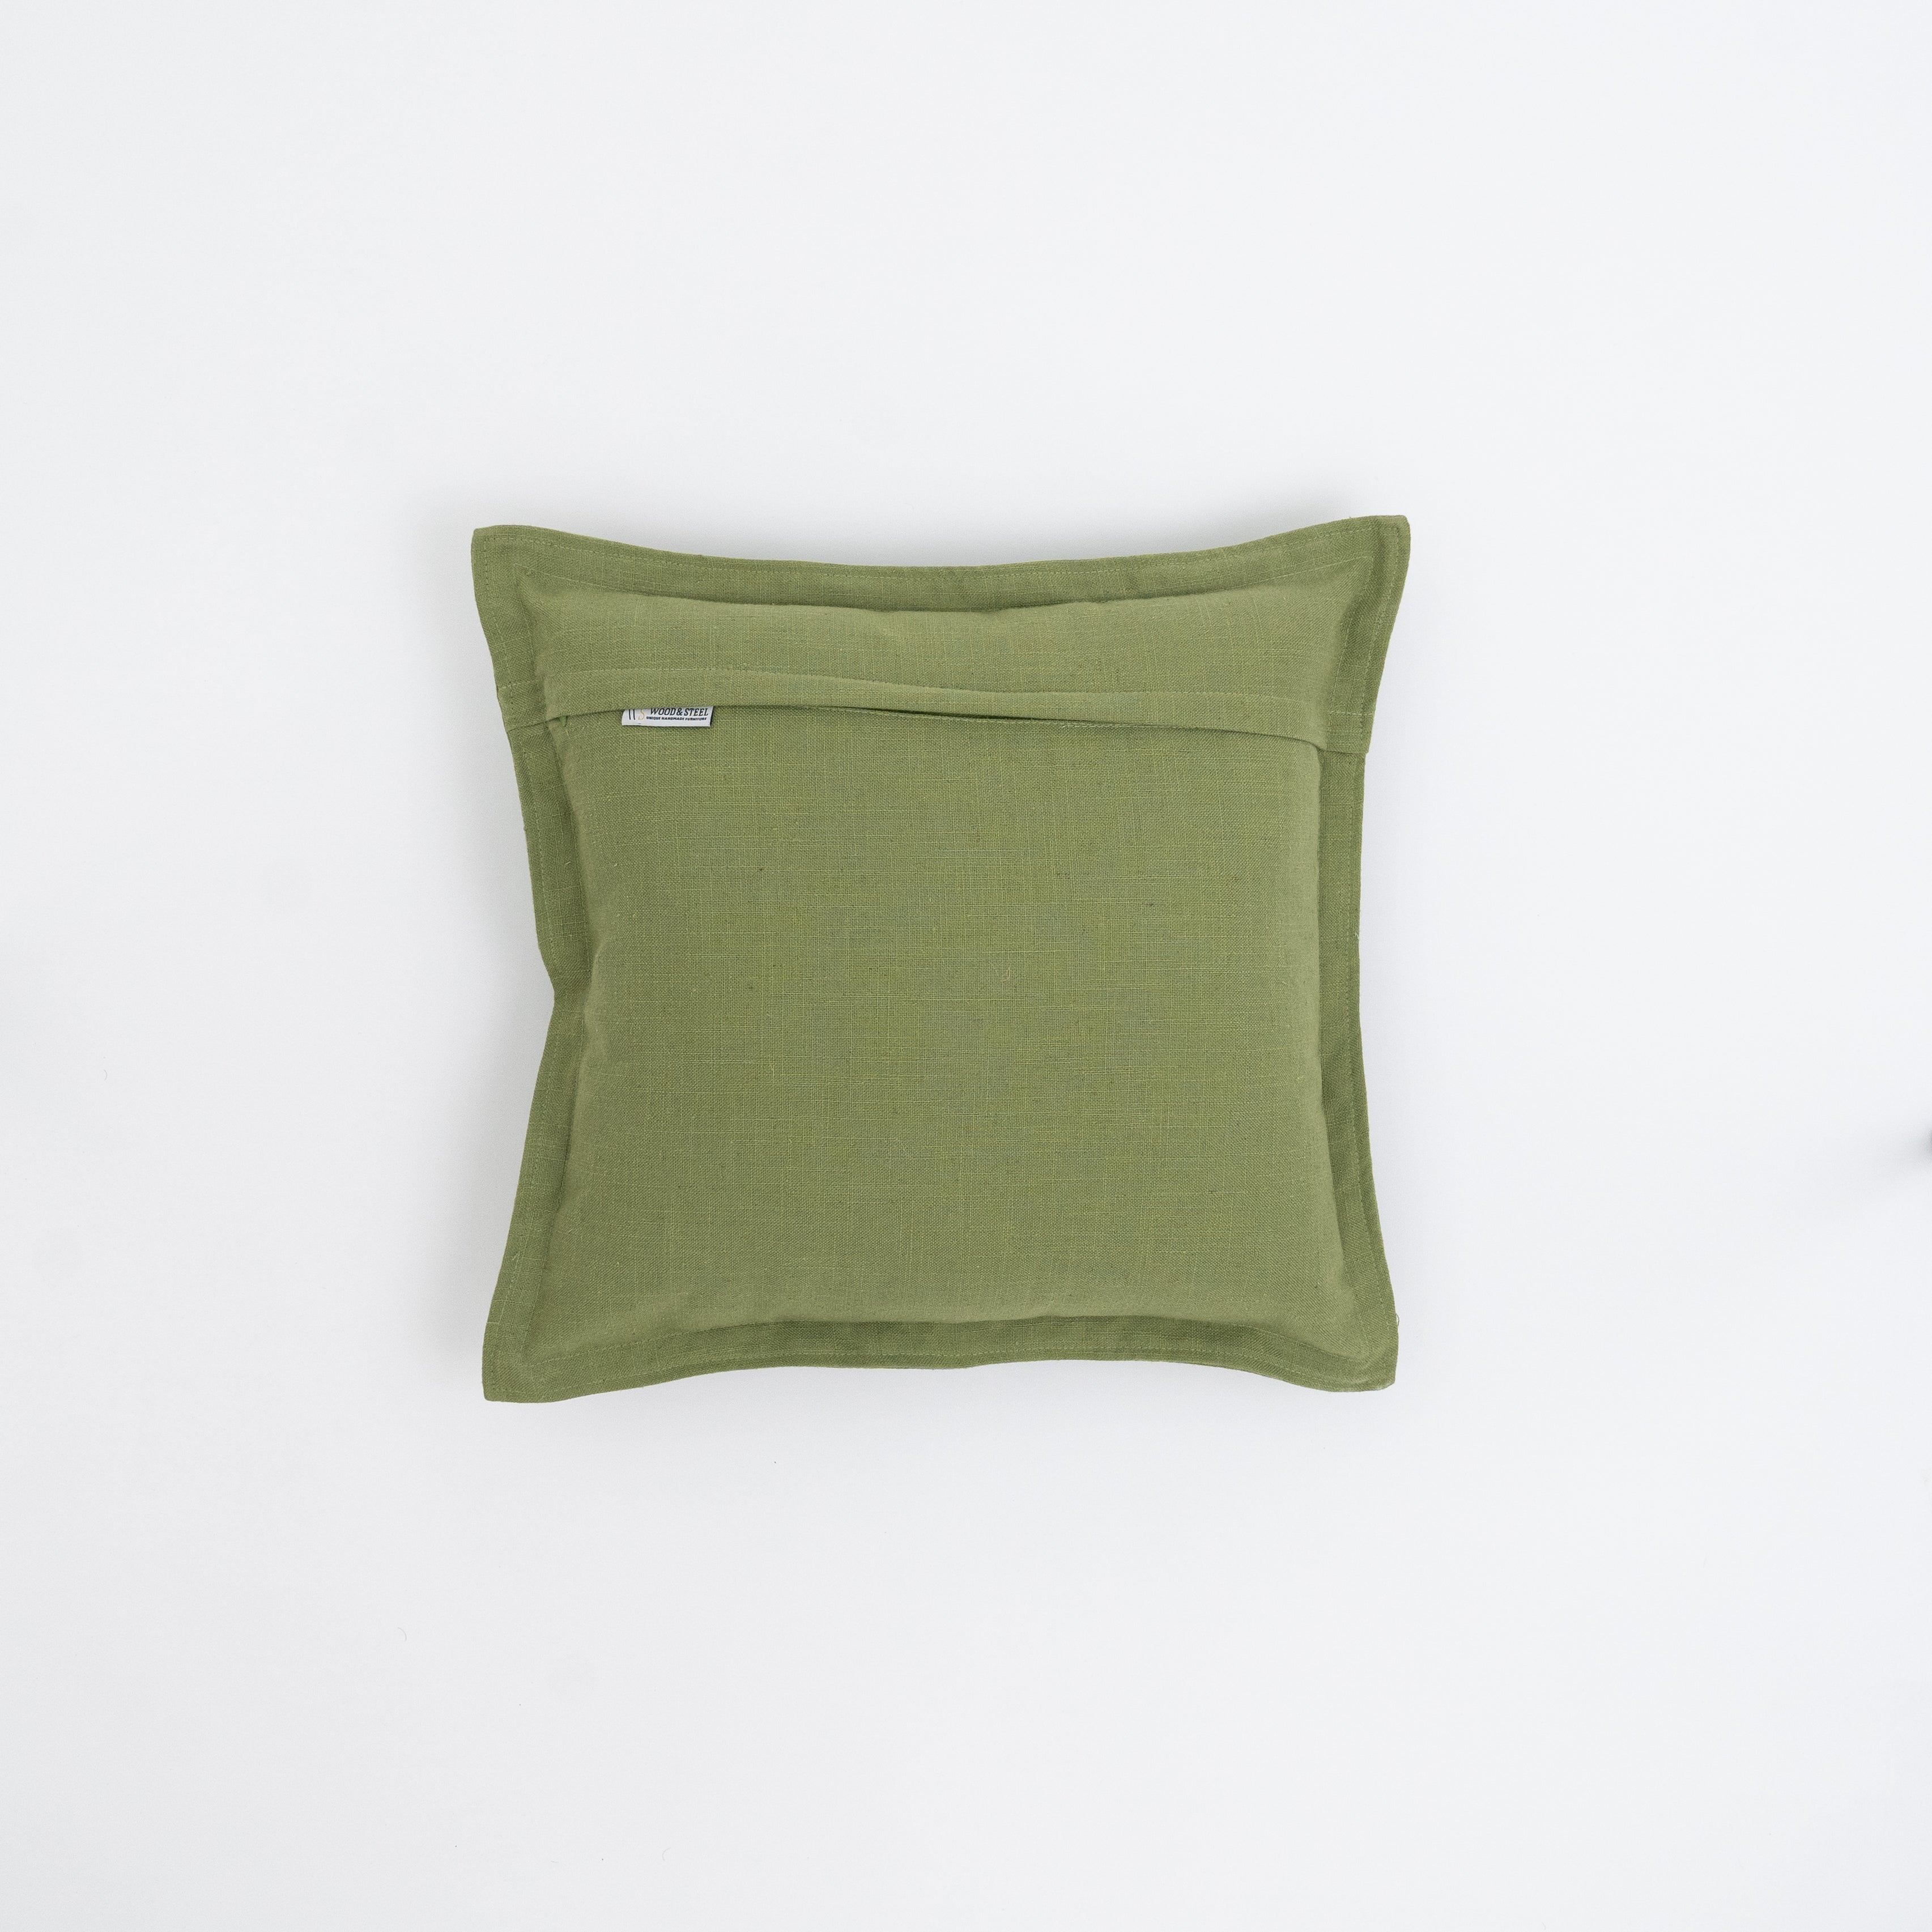 Cushion Cover Green 45 x45cm - Wood and Steel Furnitures